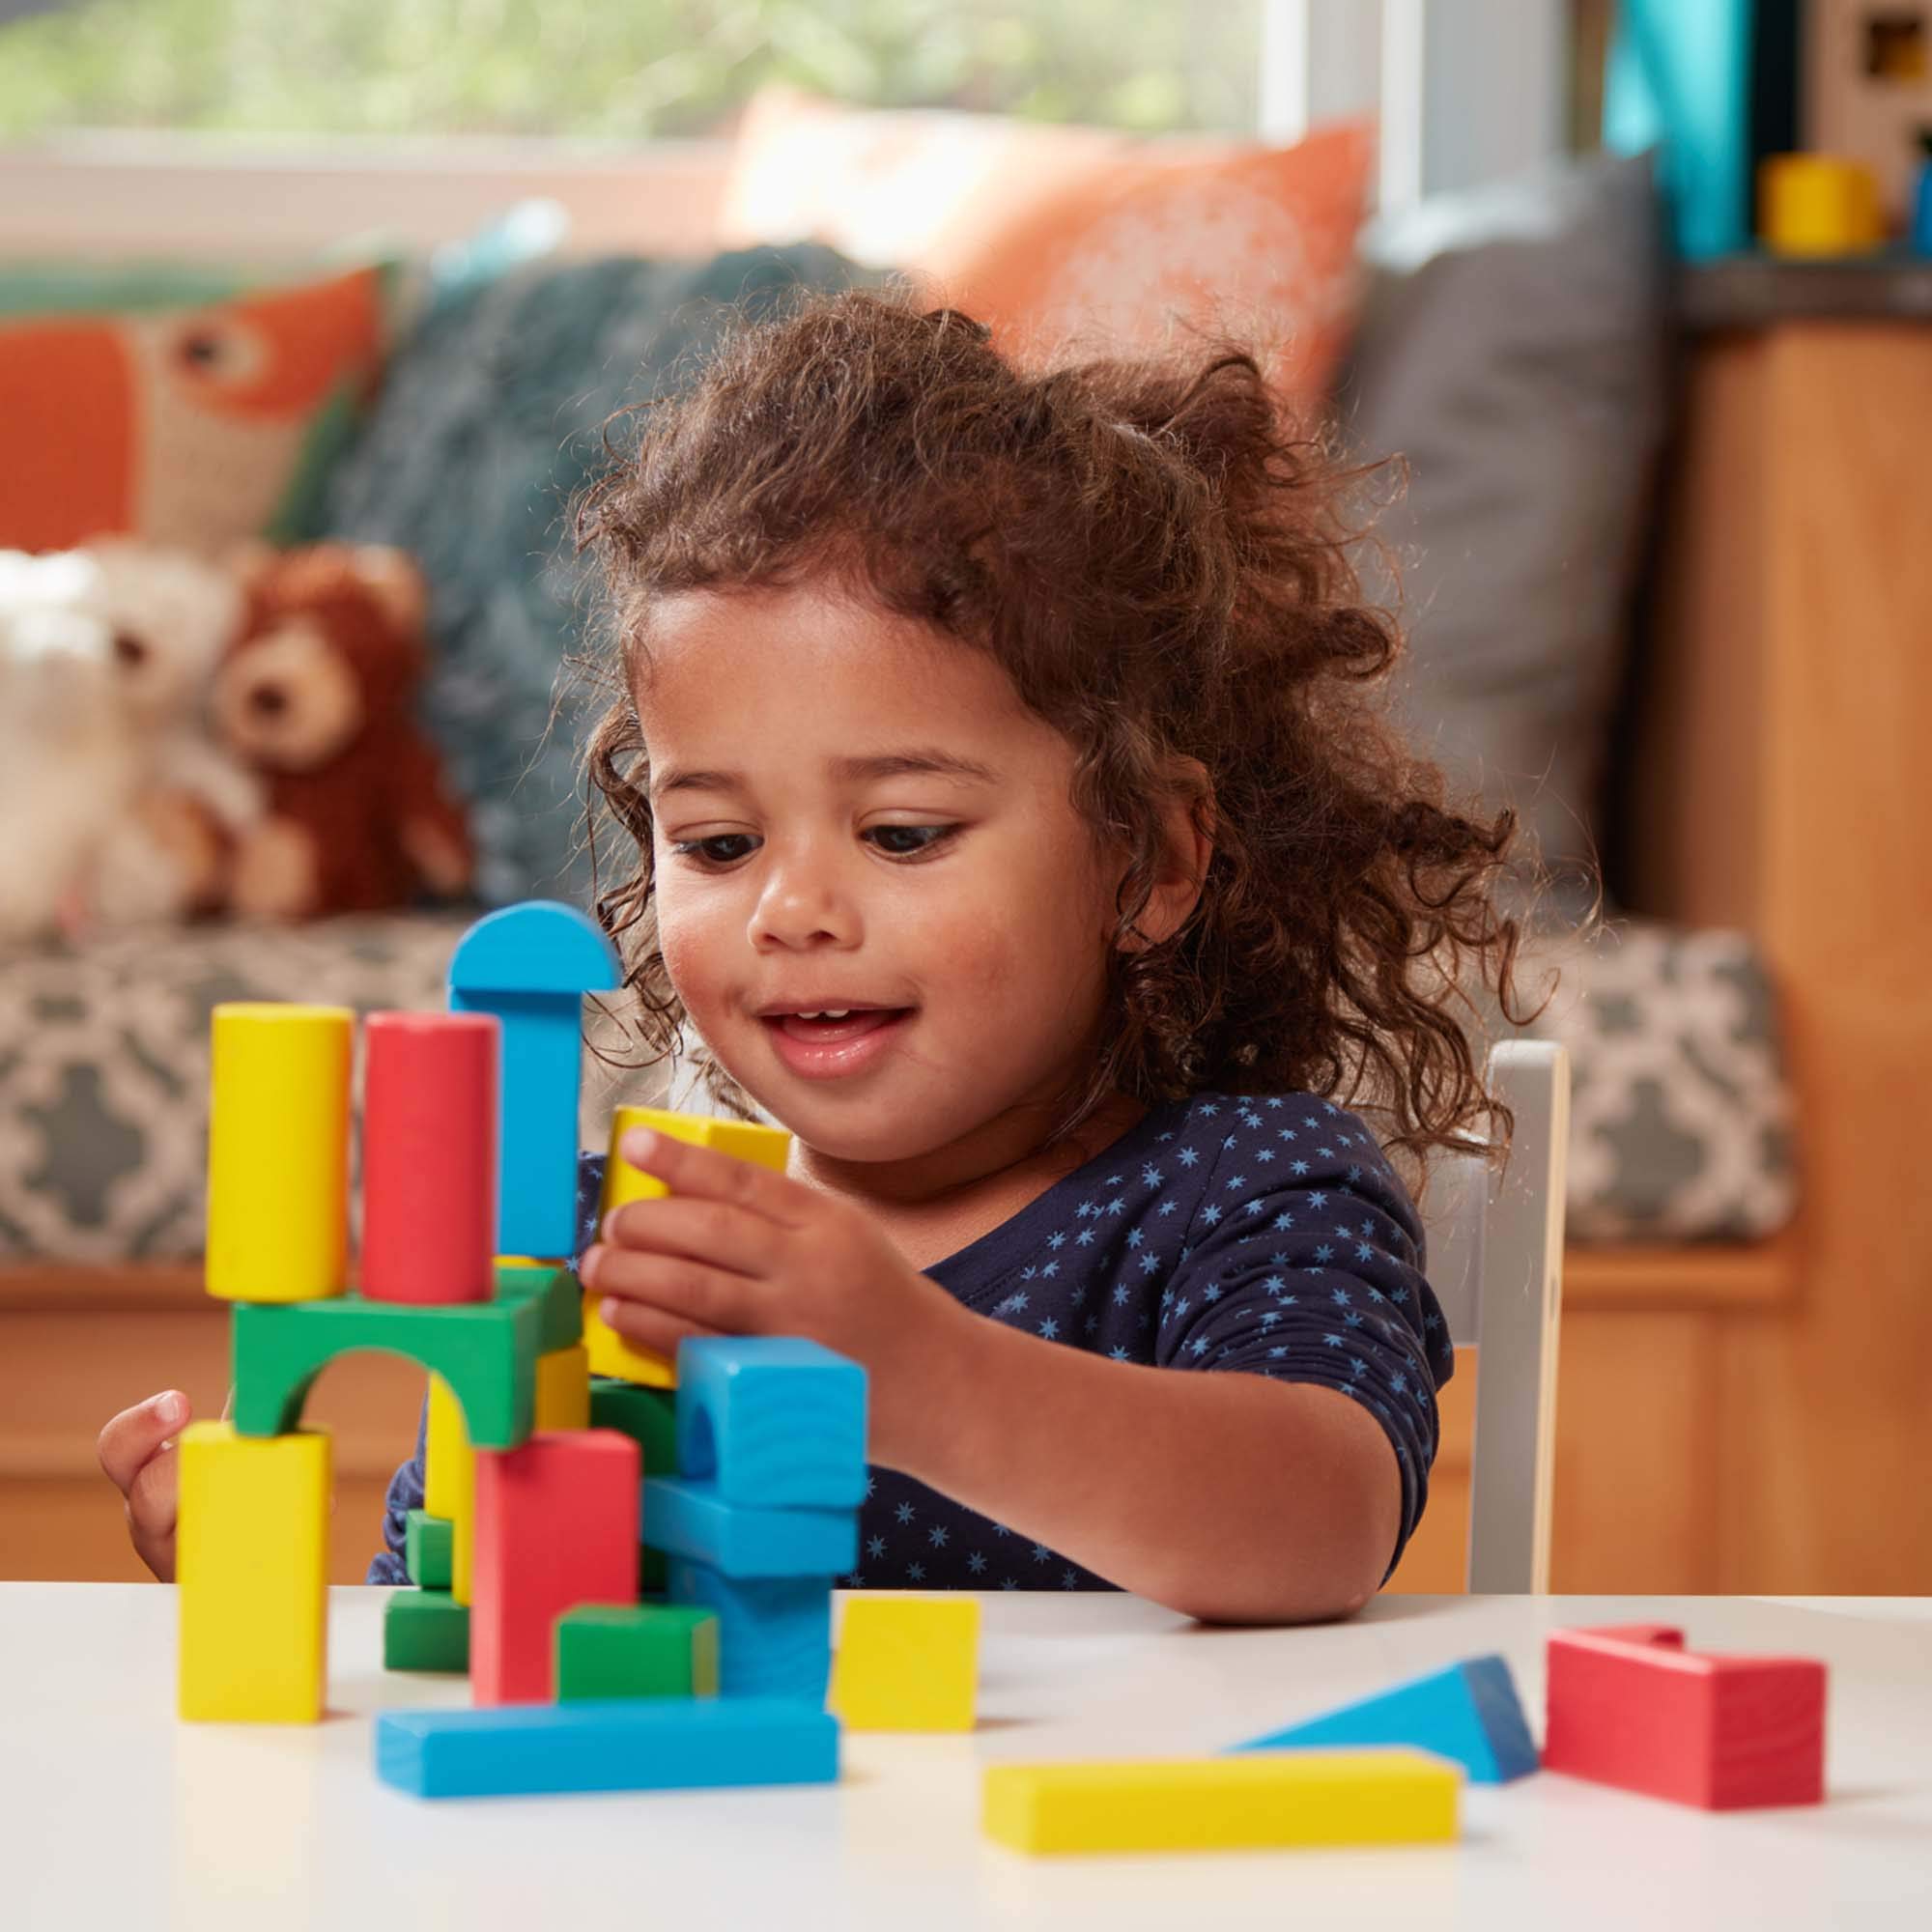 Melissa & Doug Wooden Building Block Set - 200 Blocks in 4 Colors and 9 Shapes